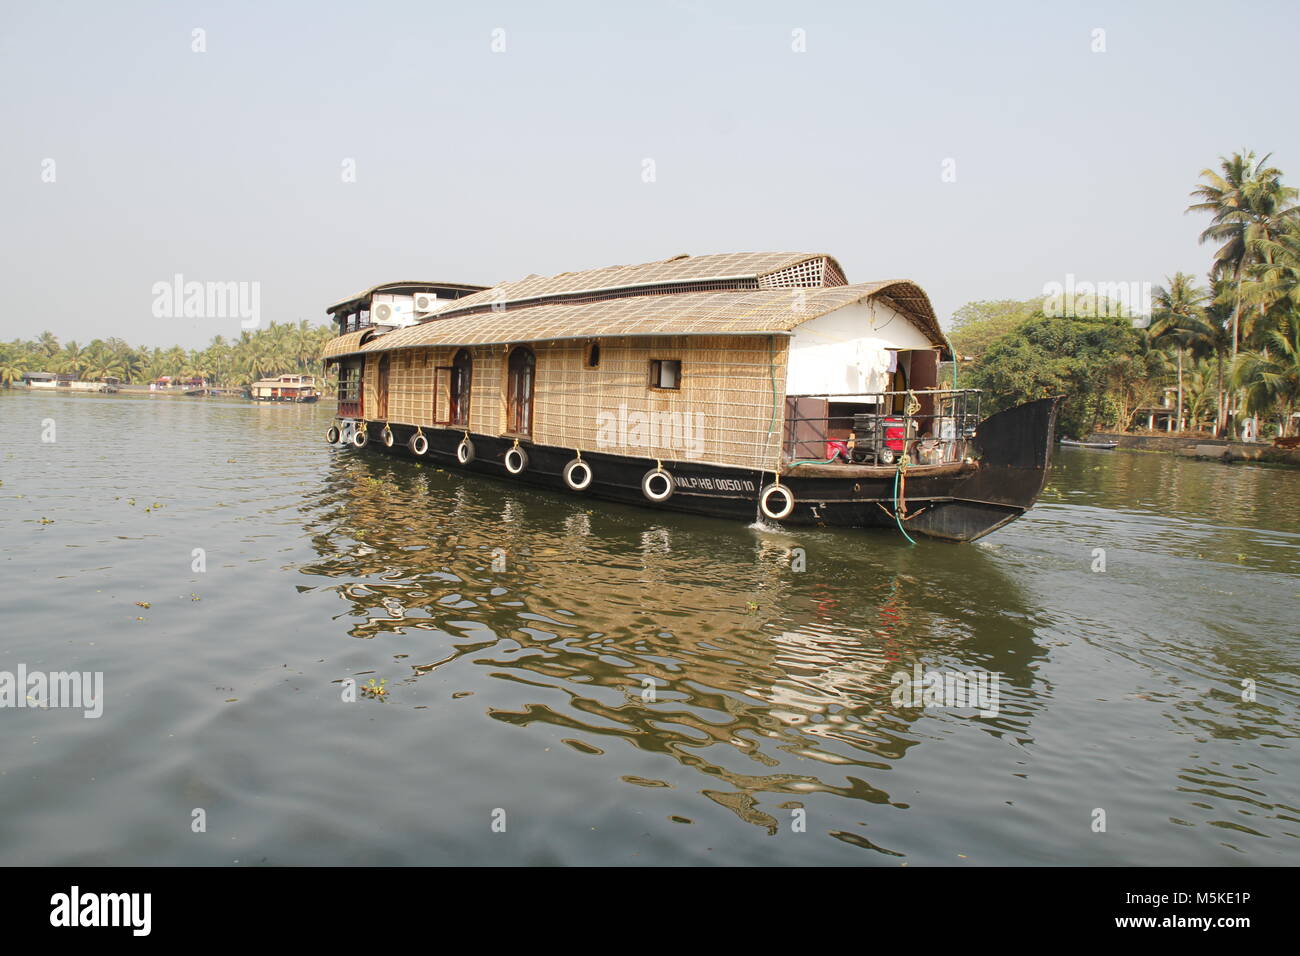 A houseboat in the backwaters of Alleppy, Kerala, India Stock Photo